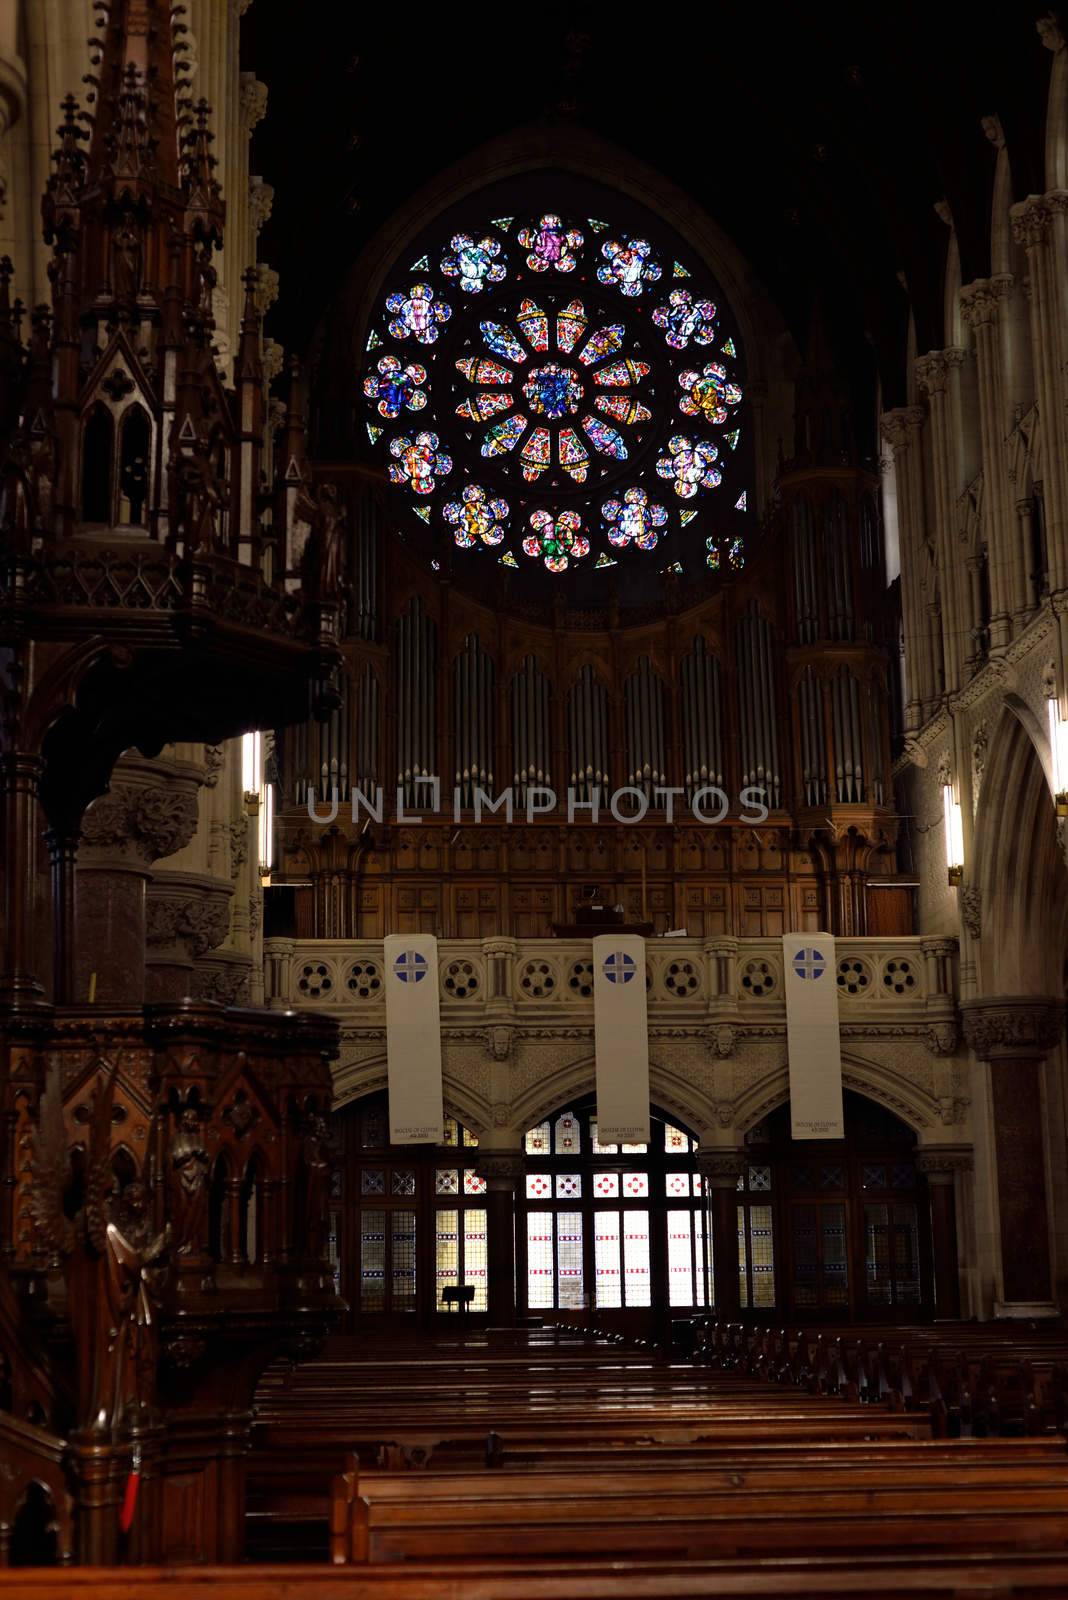 interior windows and seats of St Colman's Cathedral in cobh county cork ireland